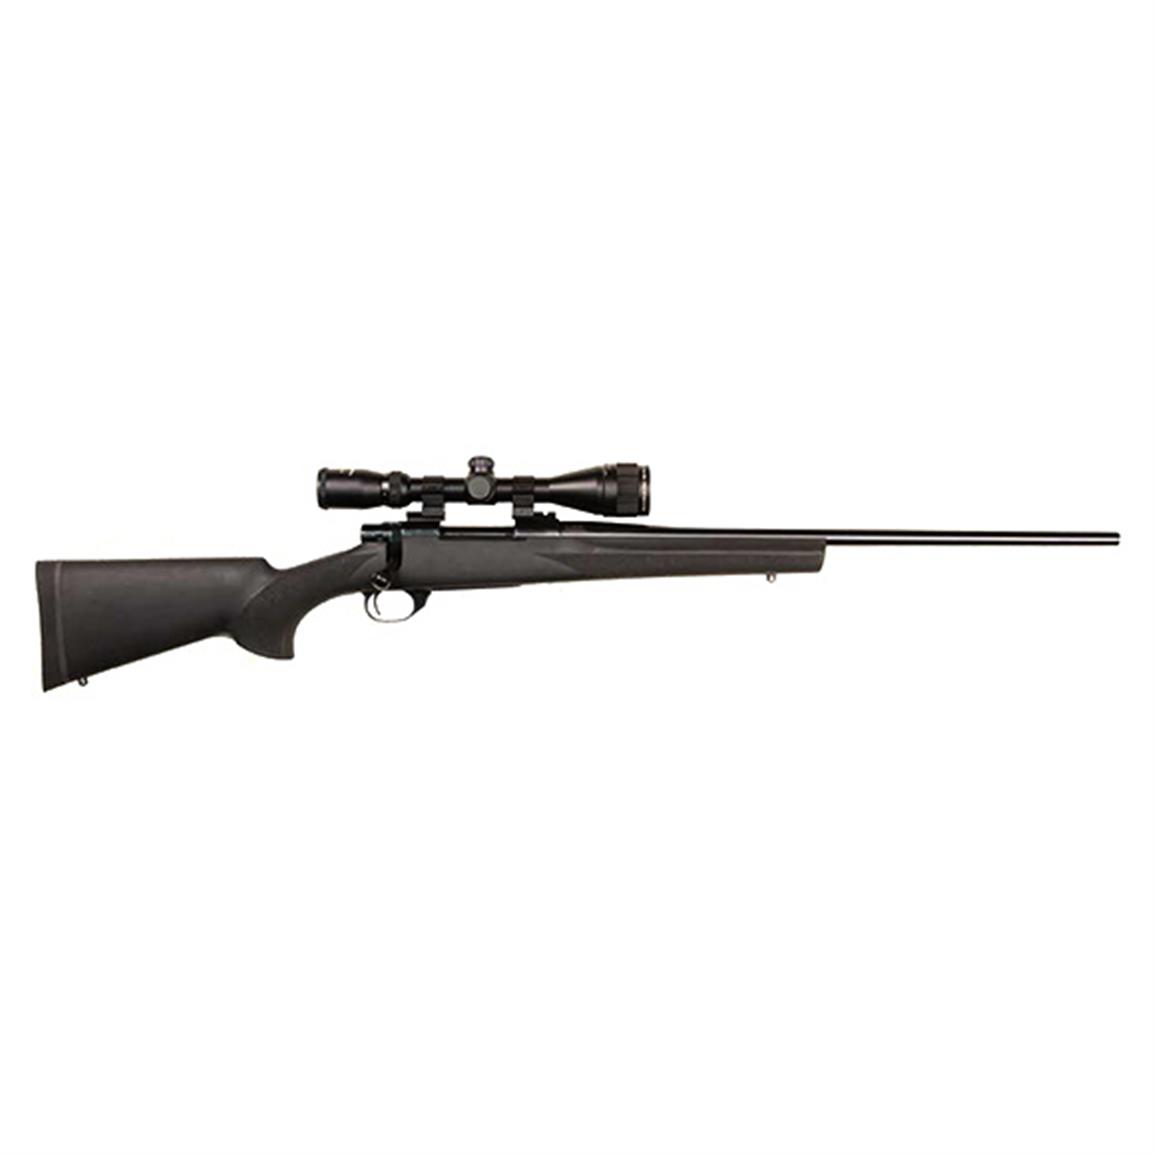 Howa Hogue Youth Rifle, Bolt-Action, 7mm-08 Remington, Nikko Stirling 3-9x40mm Scope, 5 Rounds